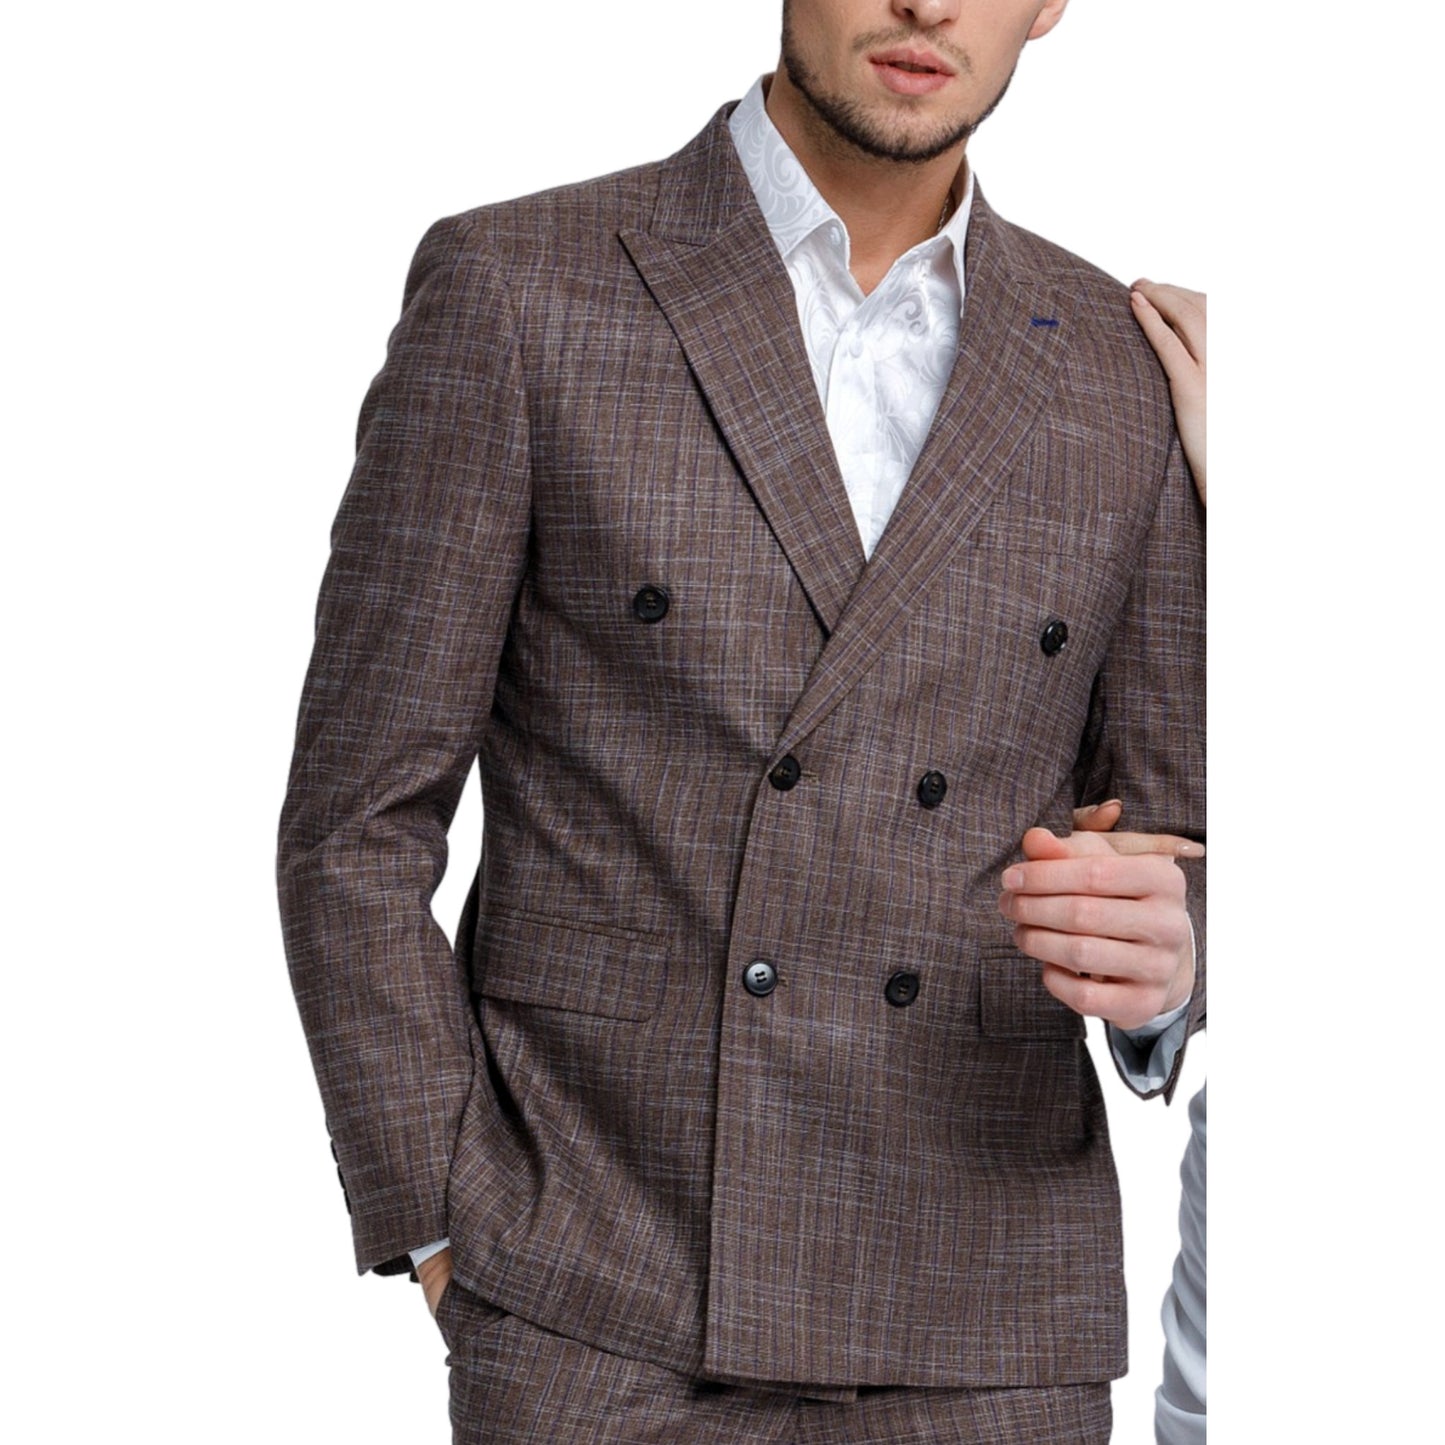 Sharp KCT Menswear Classic Brown Check Double-Breasted Suit displaying elegance and expert tailoring